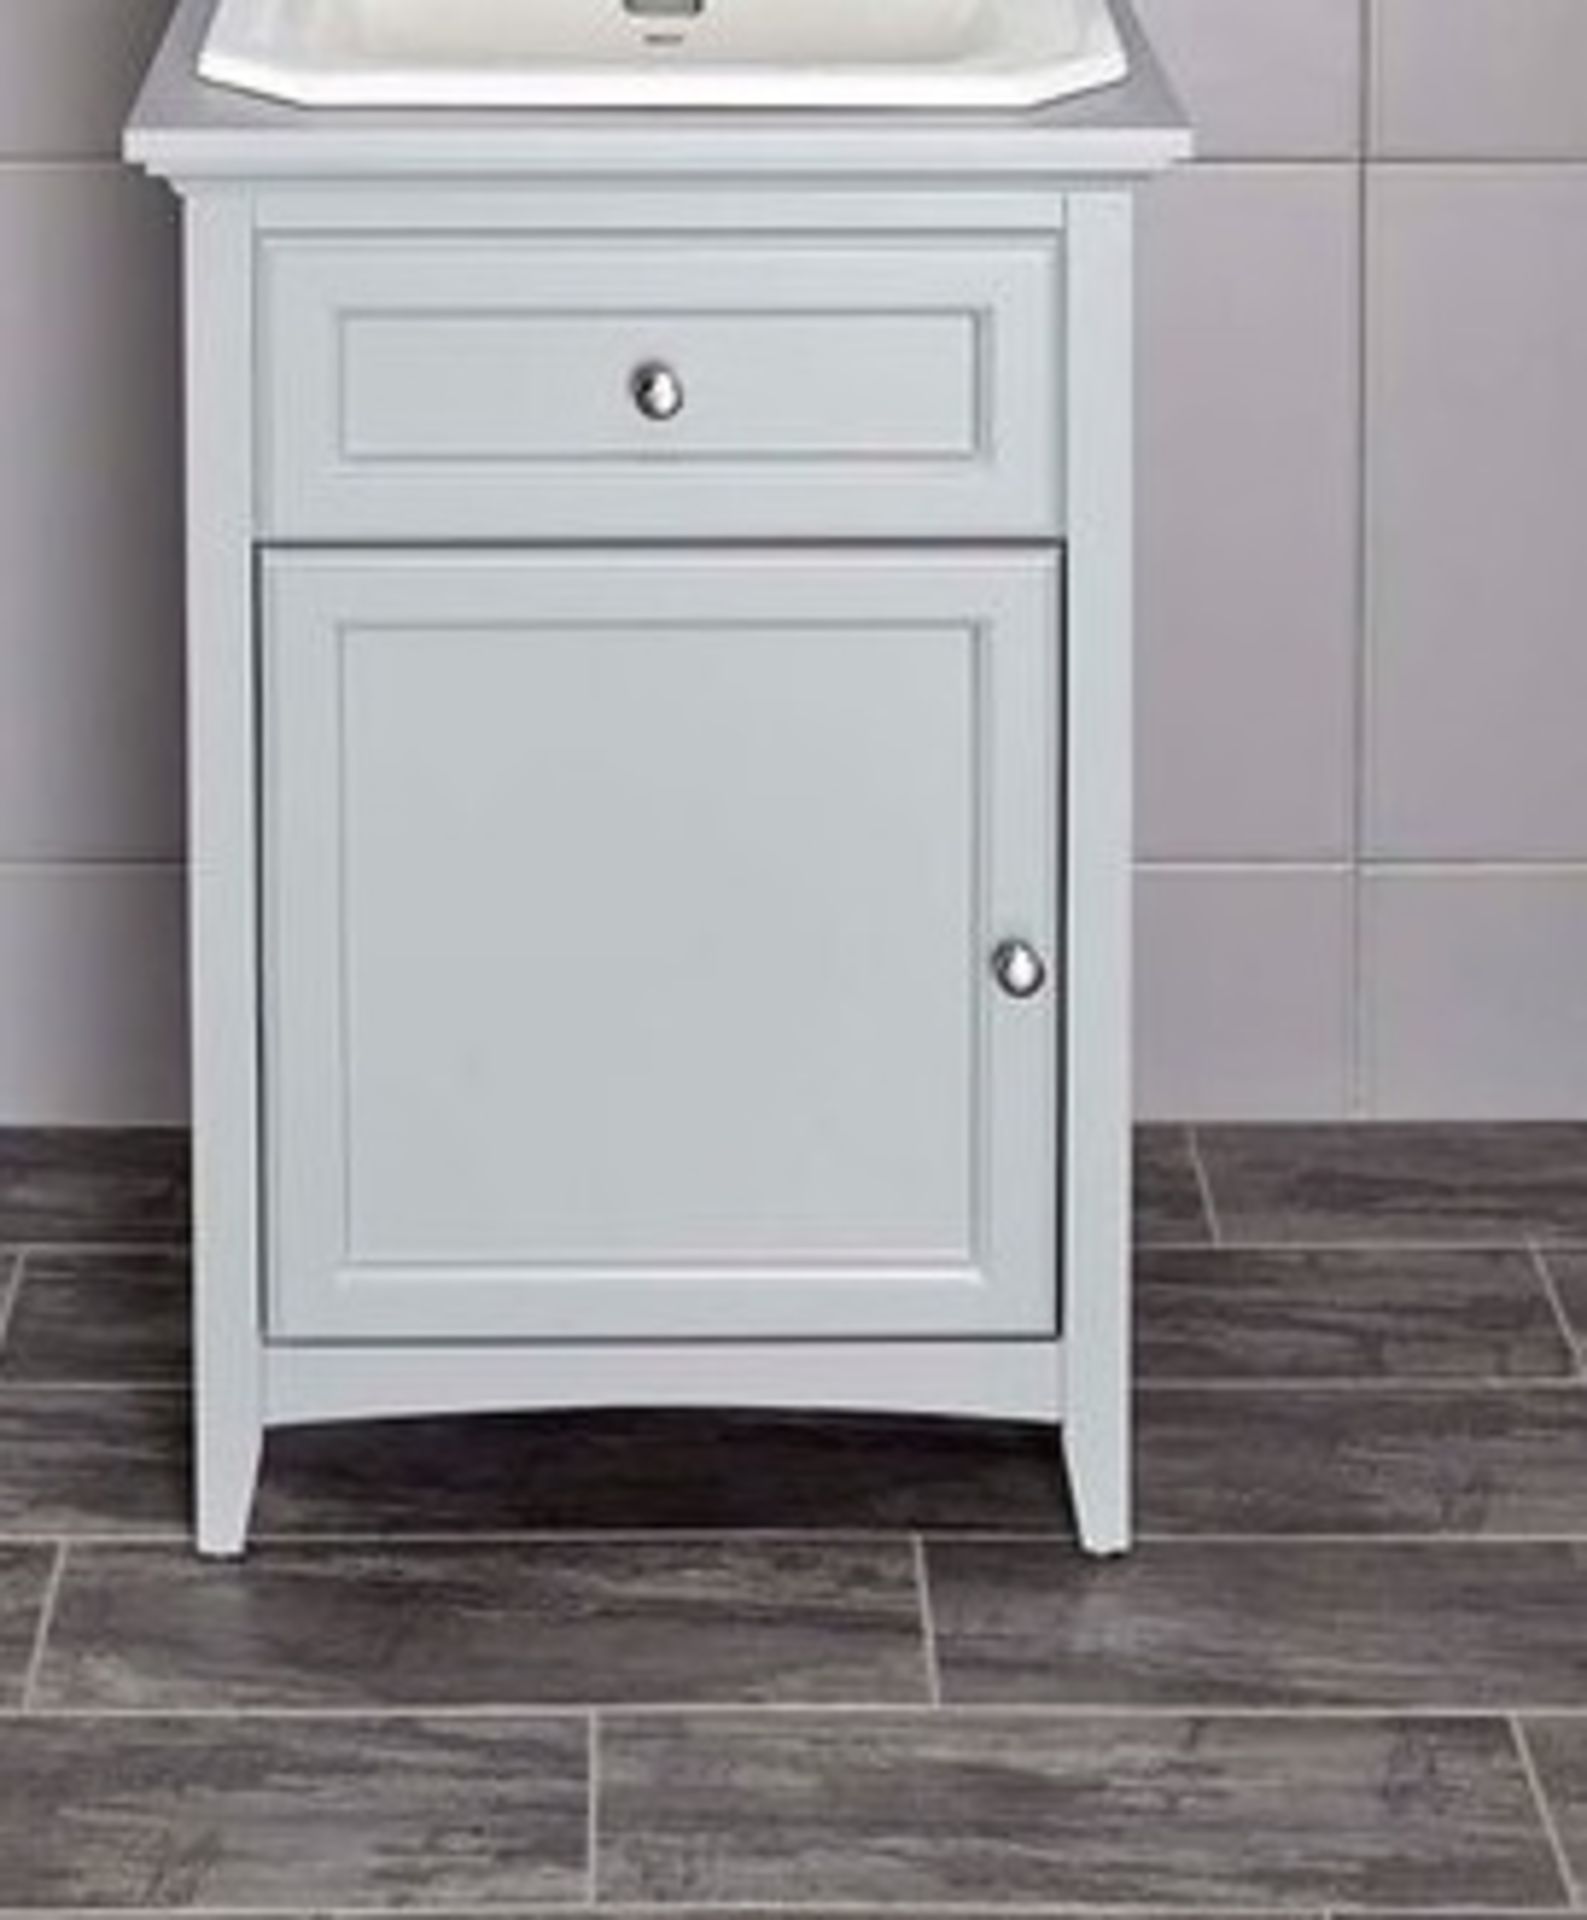 SAVOY 770 X 500MM TRADITIONAL FARMHOUSE WASHSTAND WITH TWIN SOFT CLOSE DOORS AND CHROME BUTTON - Image 2 of 2